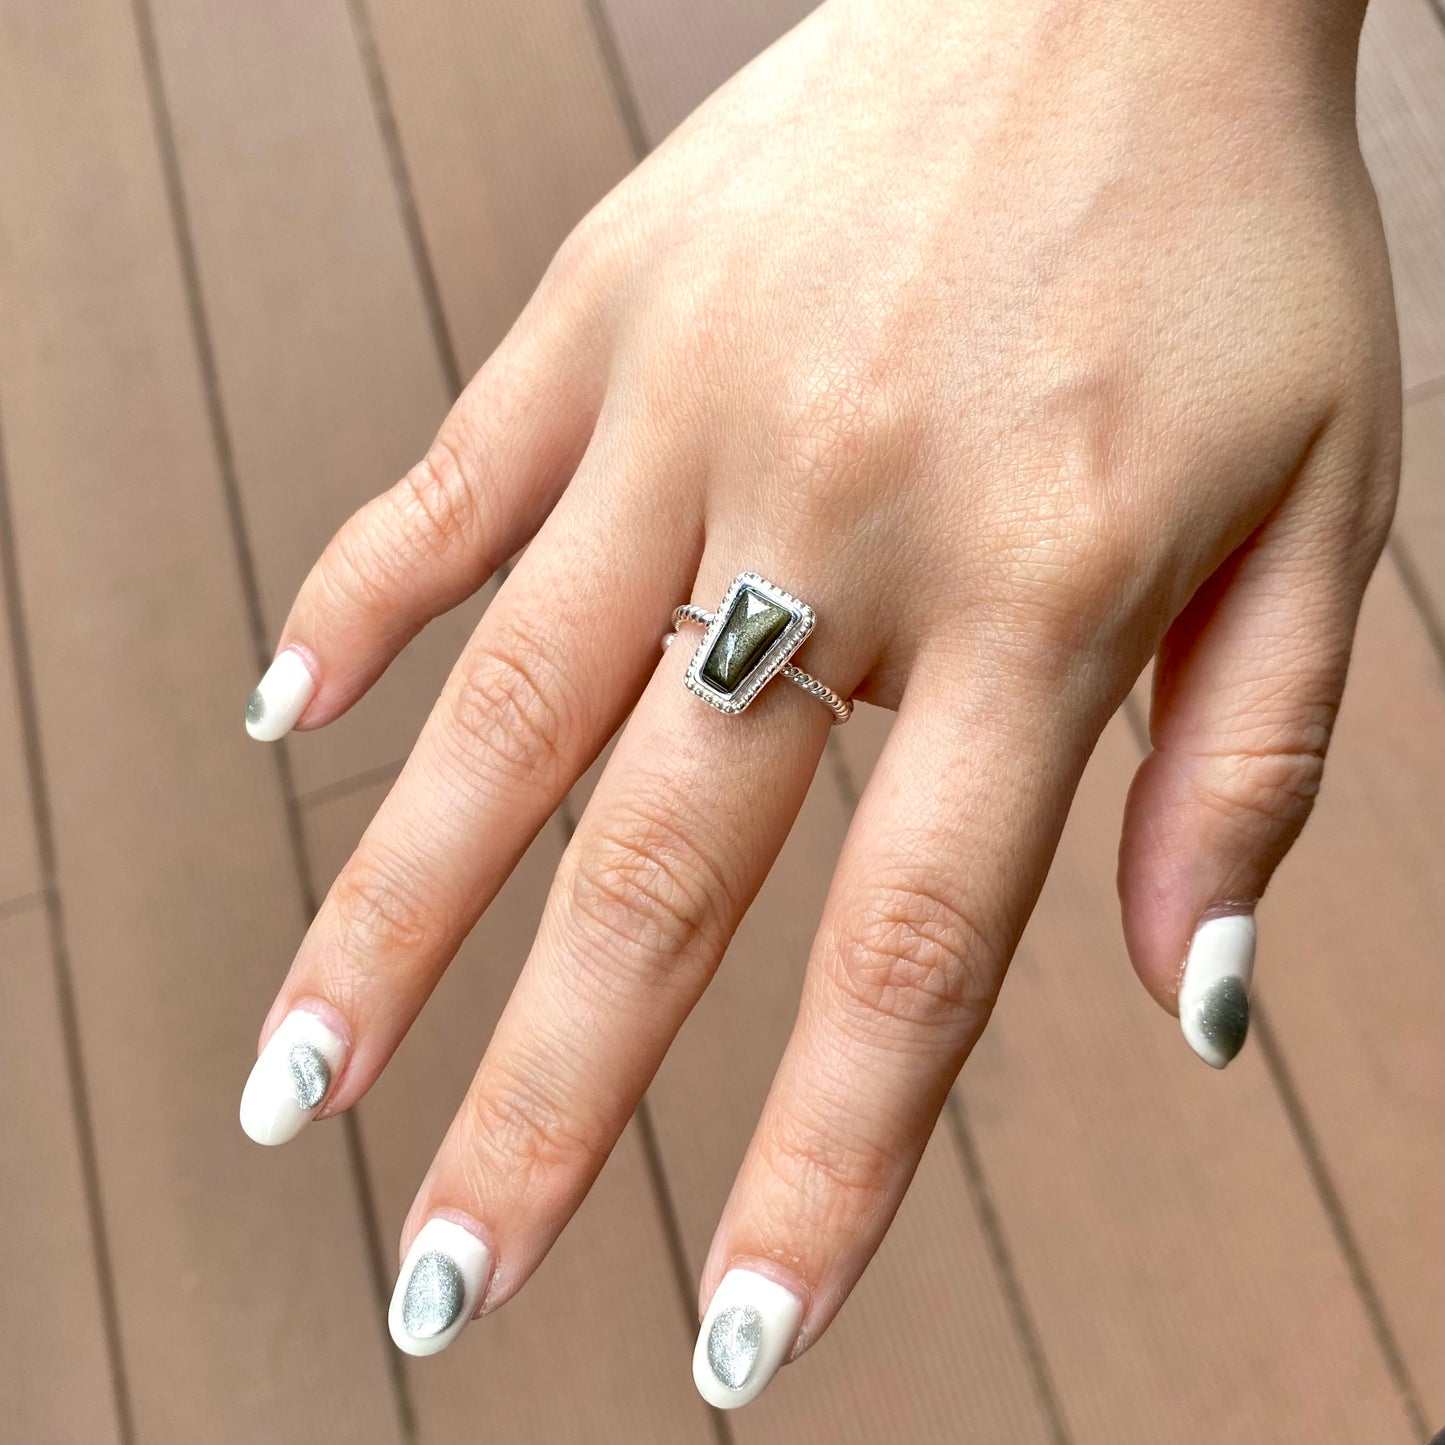 Silver925 1stone ring 2